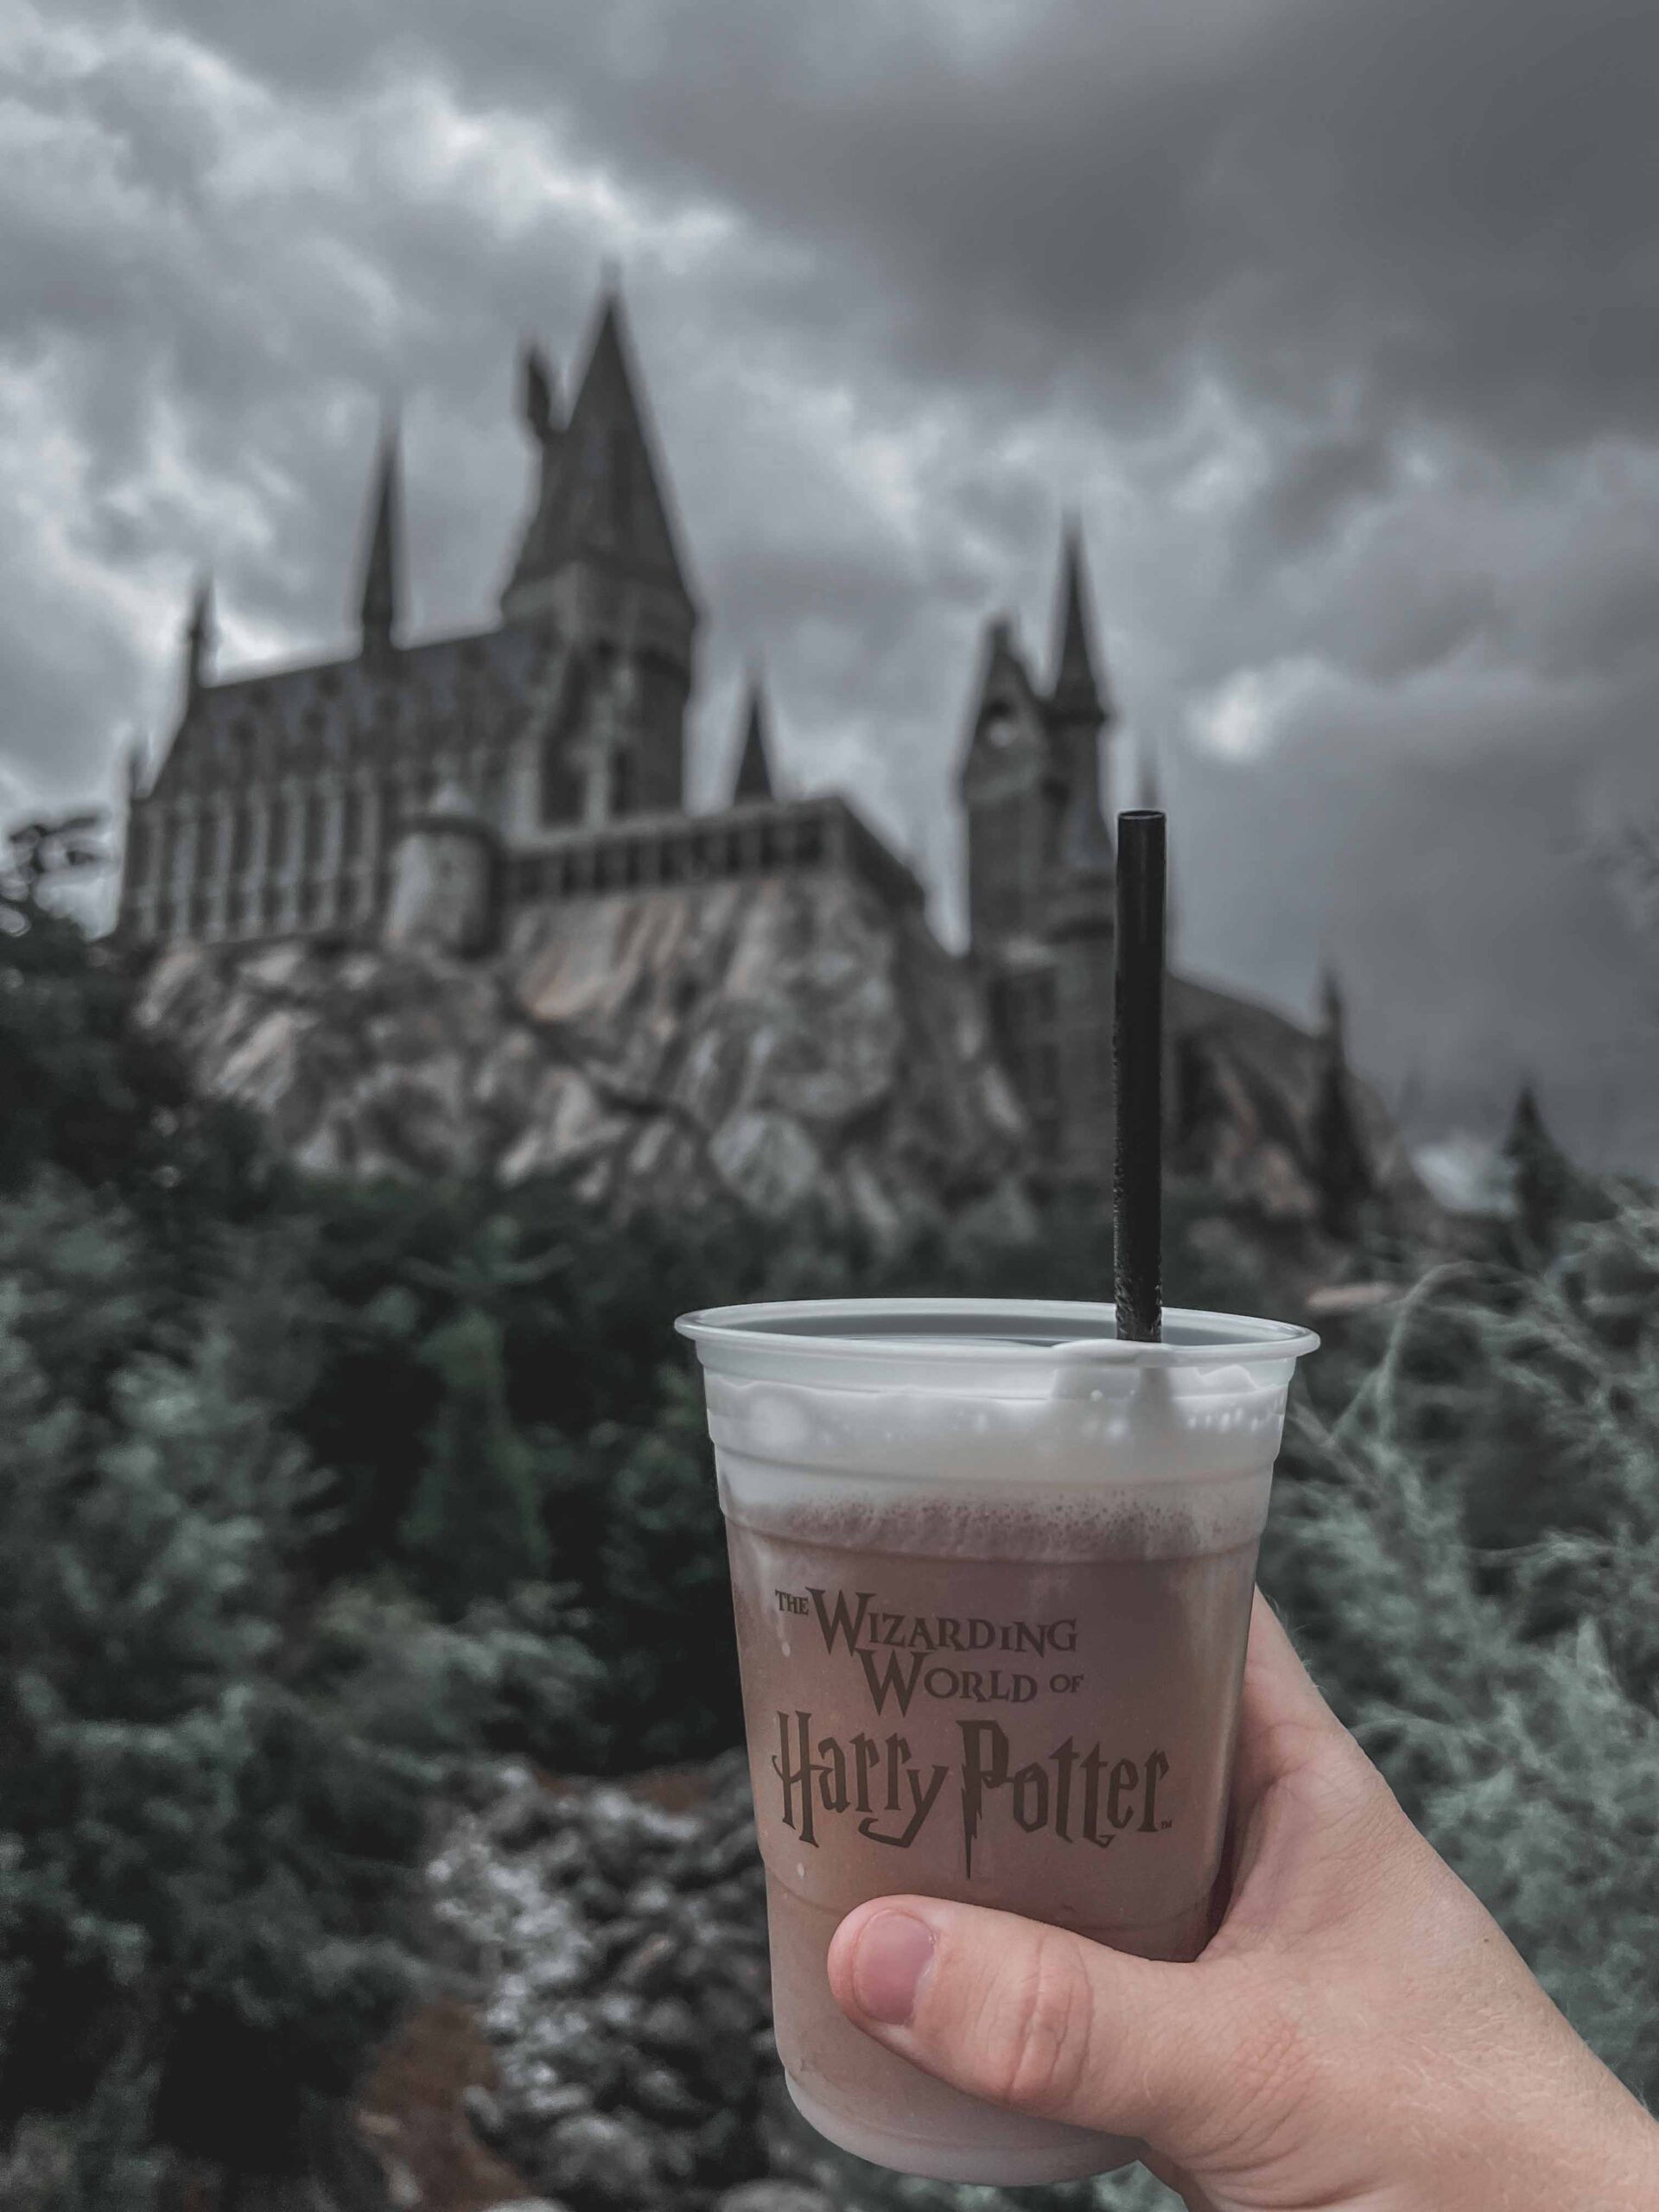 5 Things I Won’t Do Again In The Wizarding World Of Harry Potter